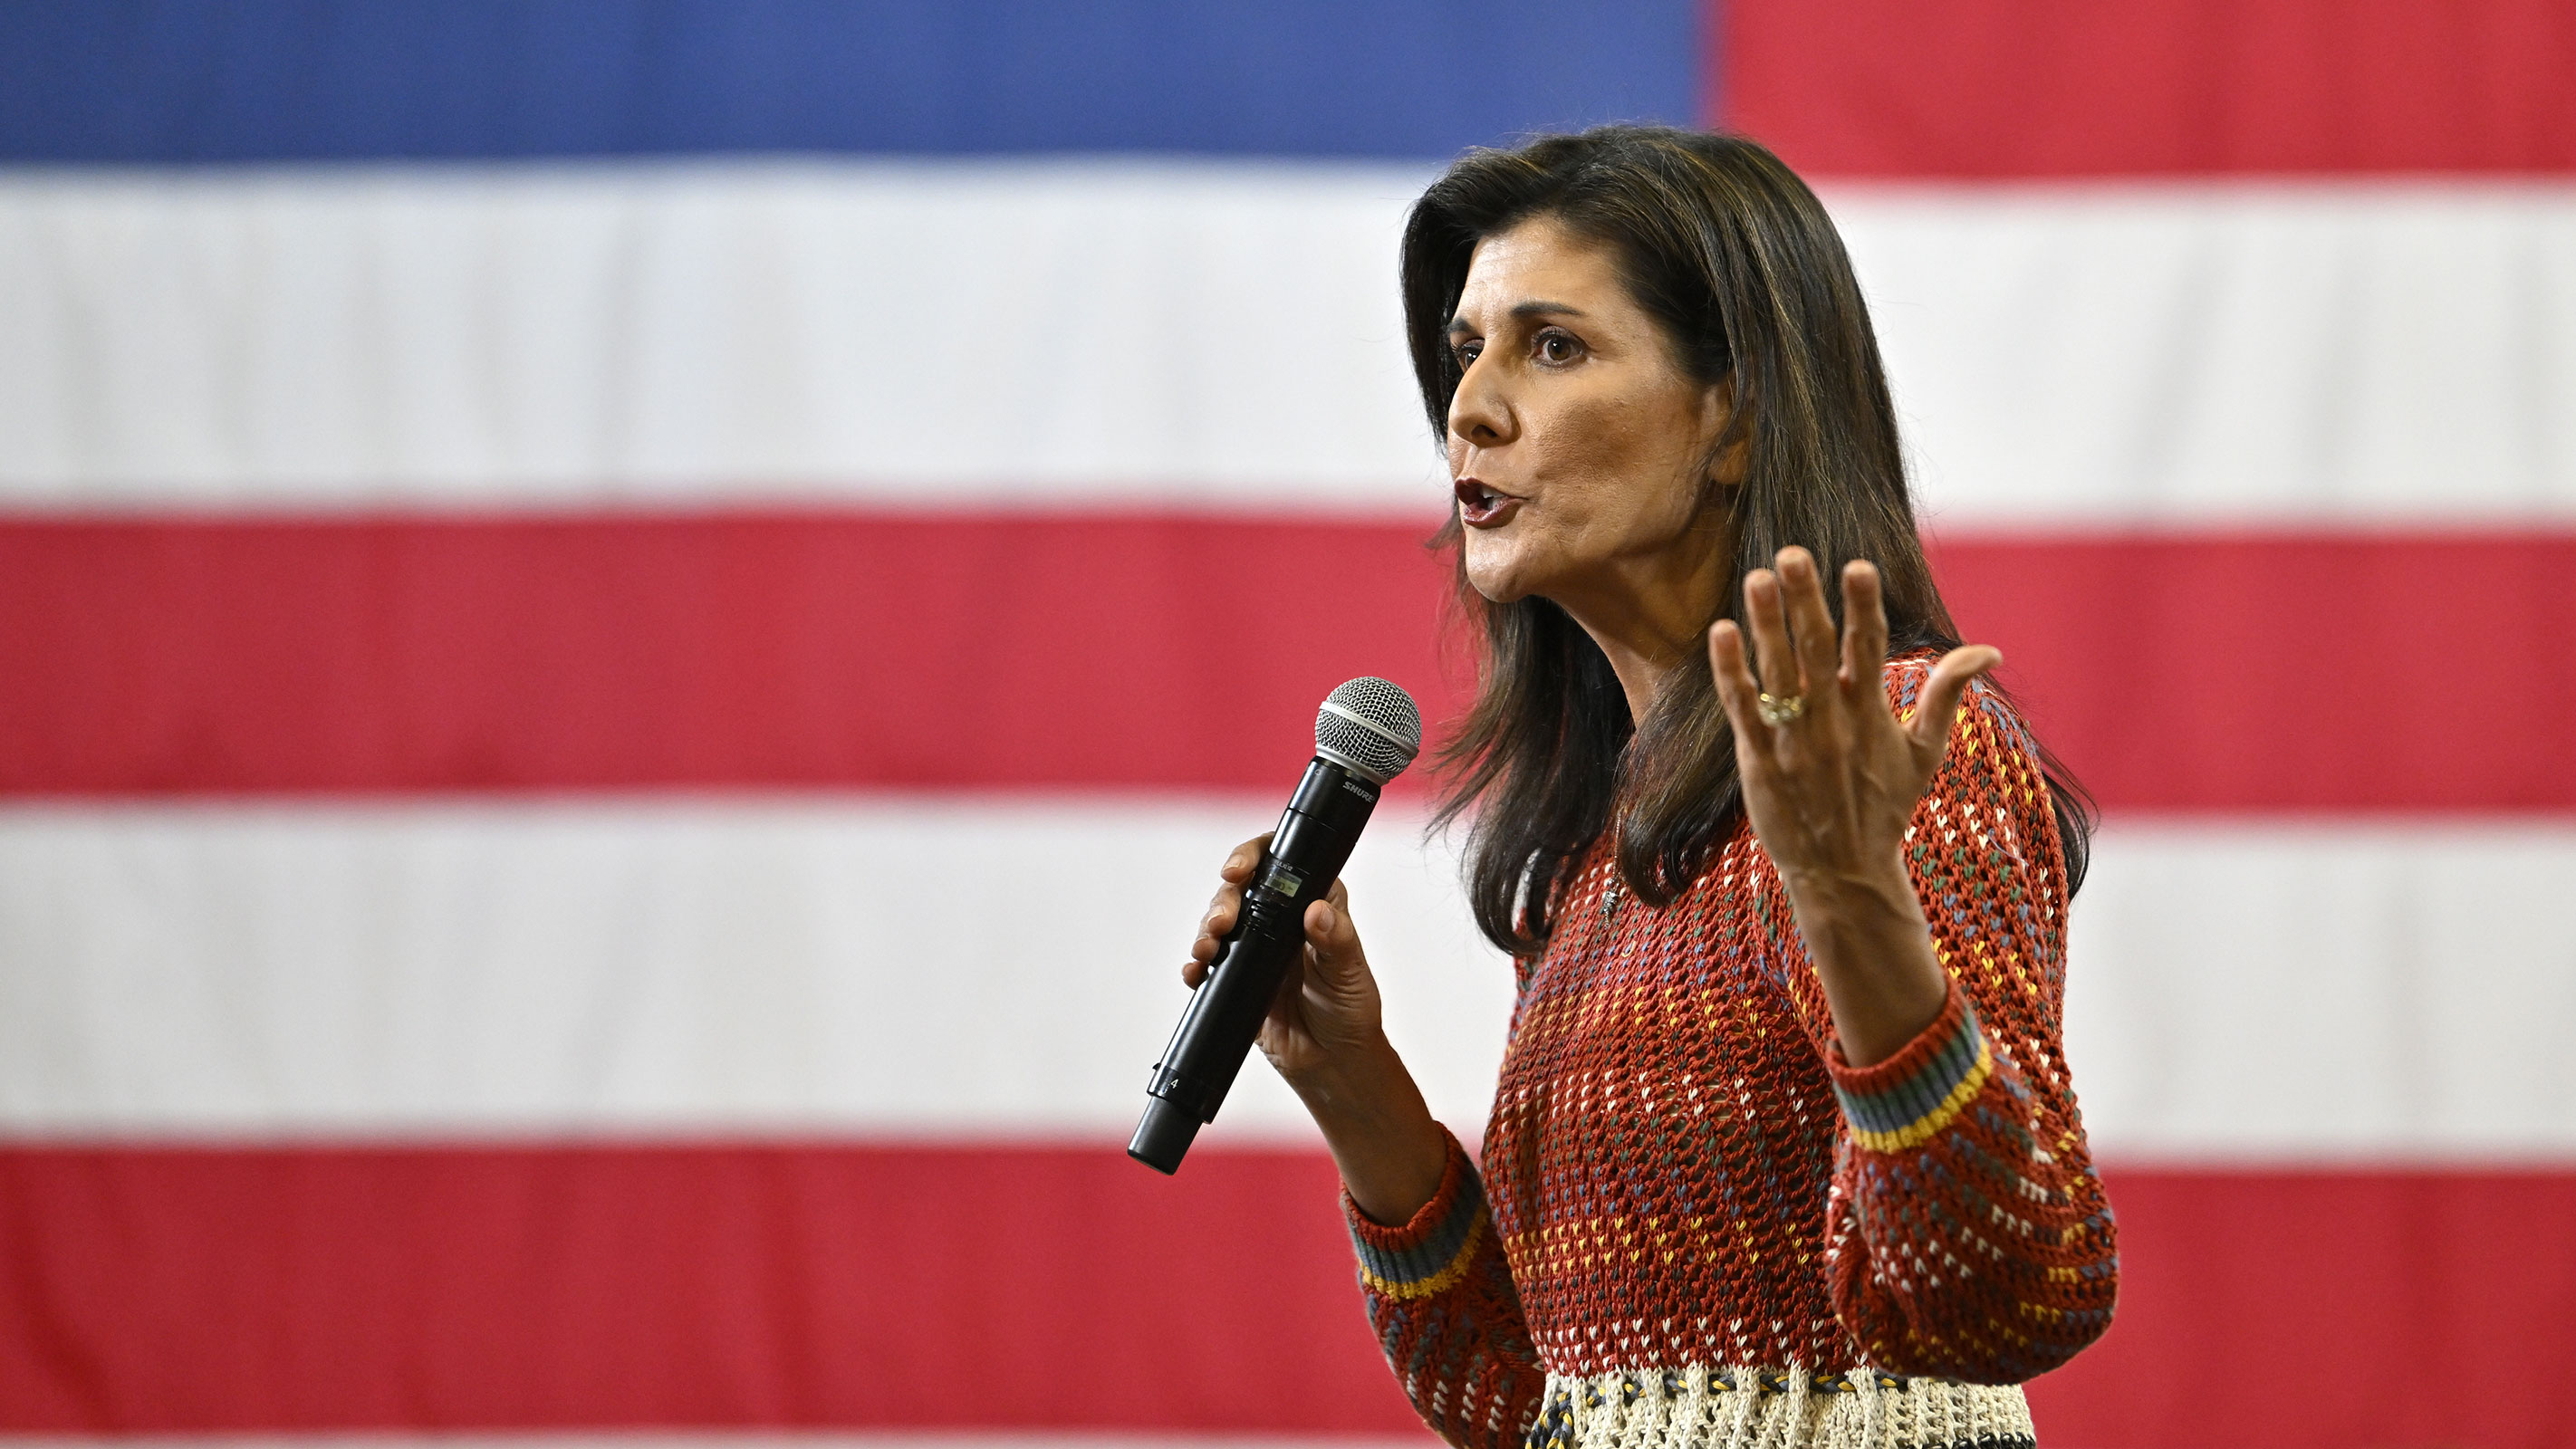 Republican presidential candidate and former South Carolina governor Nikki Haley holds a rally in Greer, South Carolina, United States on May 4, 2023.